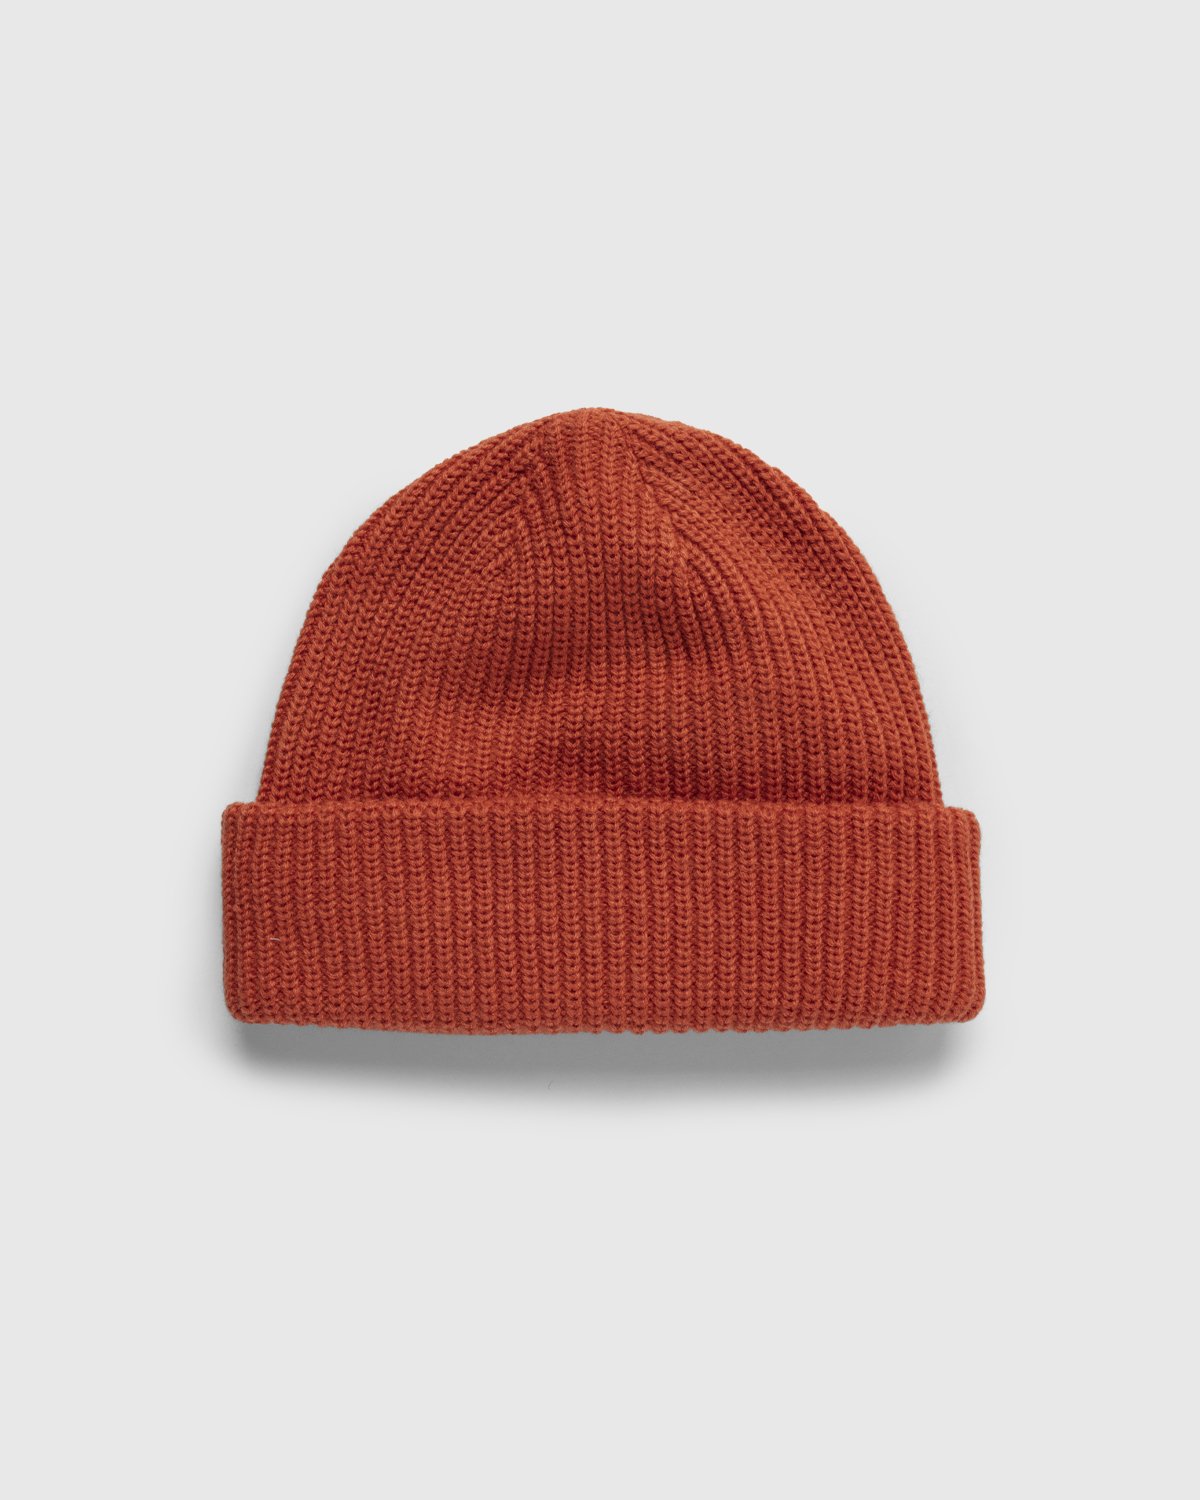 The North Face - Salty Dog Beanie Burntochre Moonlight Ivory - Accessories - Orange - Image 2